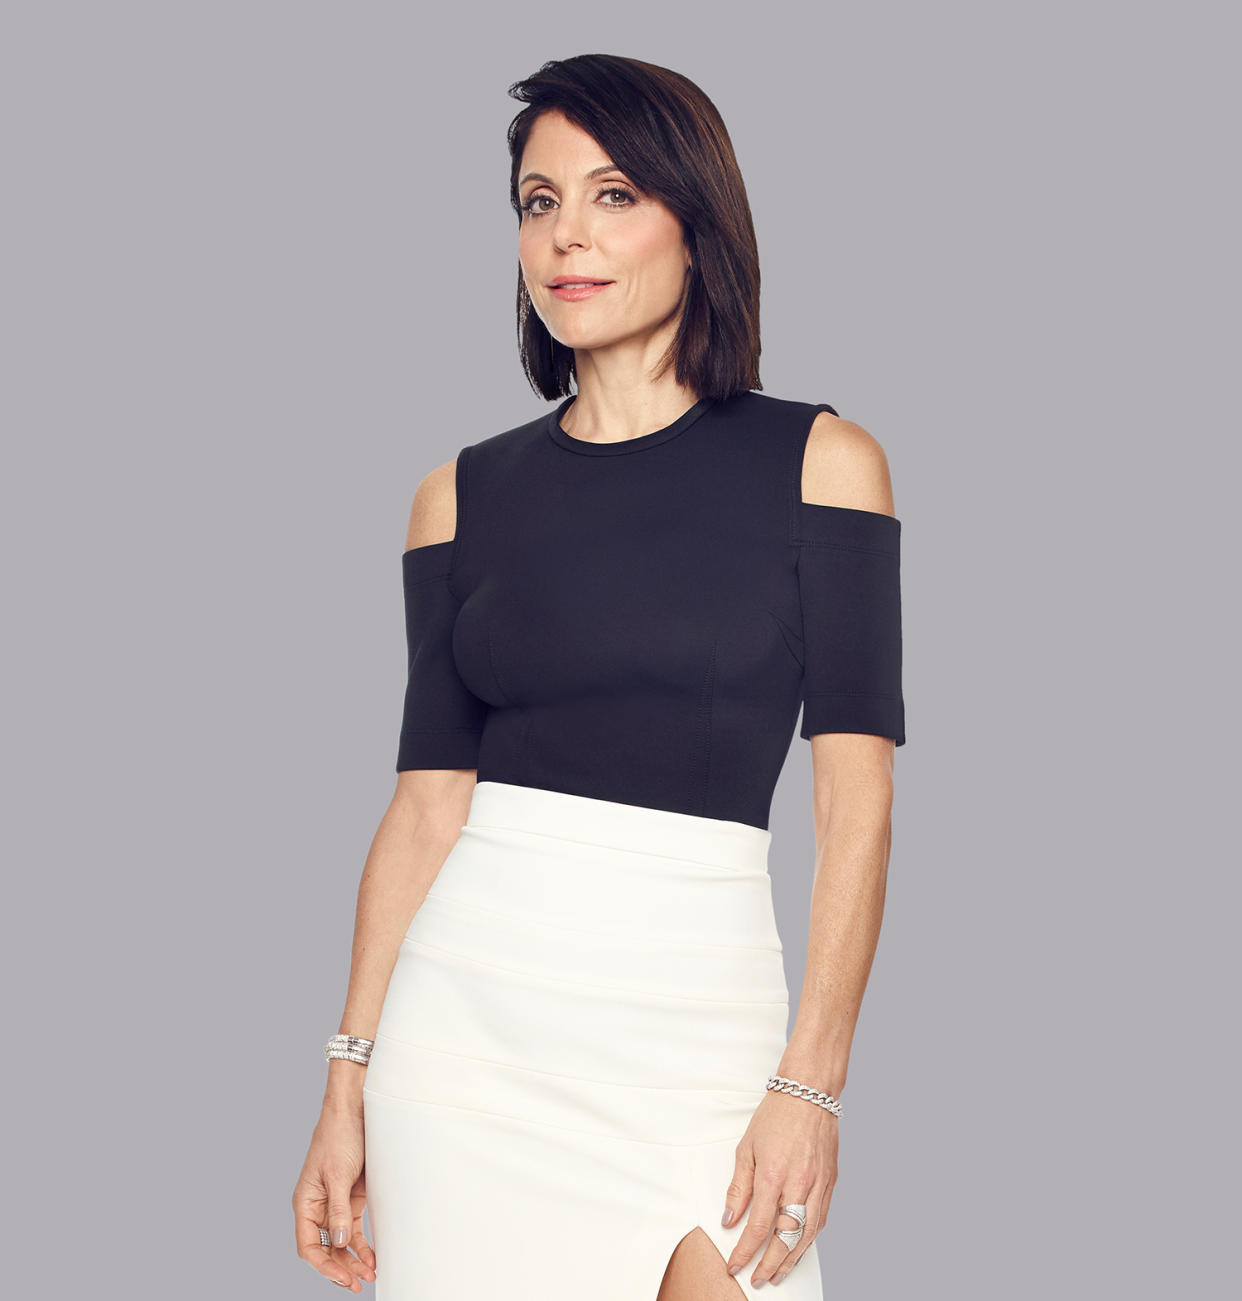 Bethenny Frankel launches a new fashion line, Skinnygirl Jeans. (Photo: Getty Images)